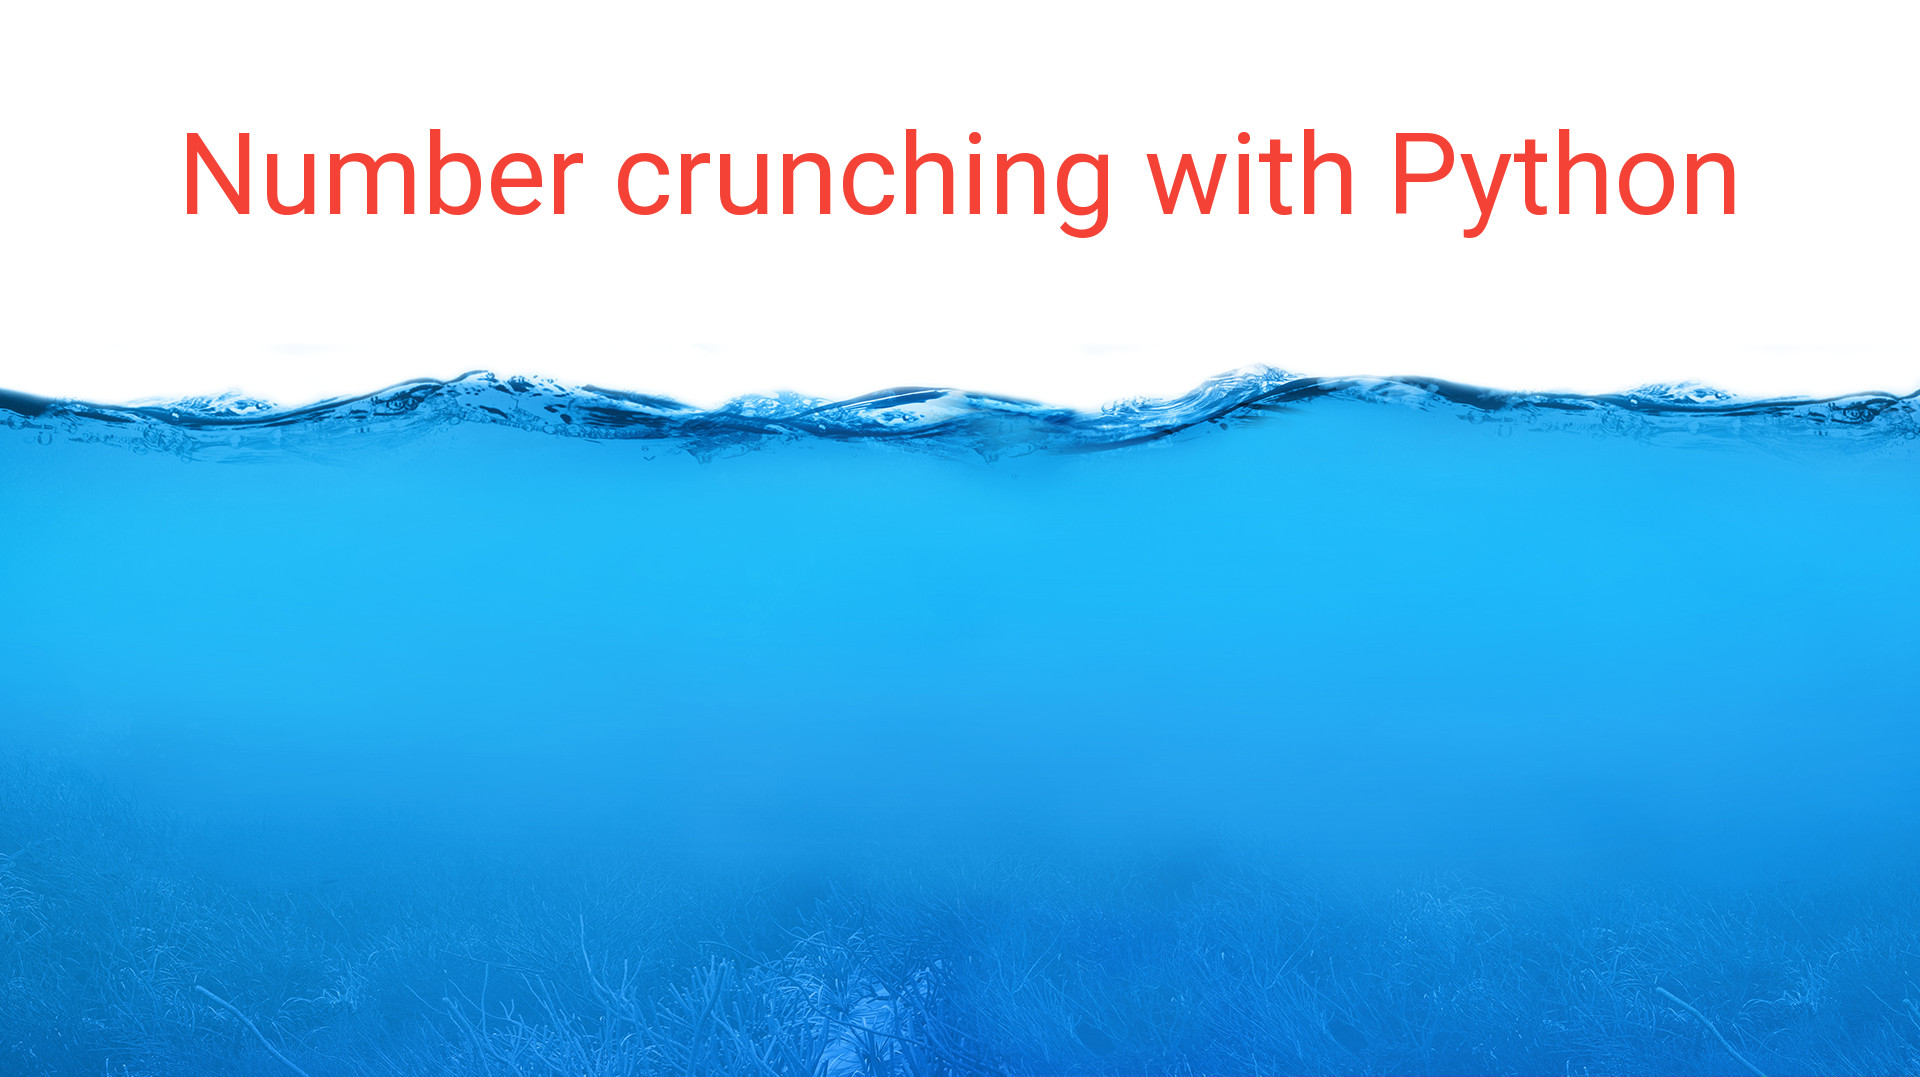 Number crunching with Python